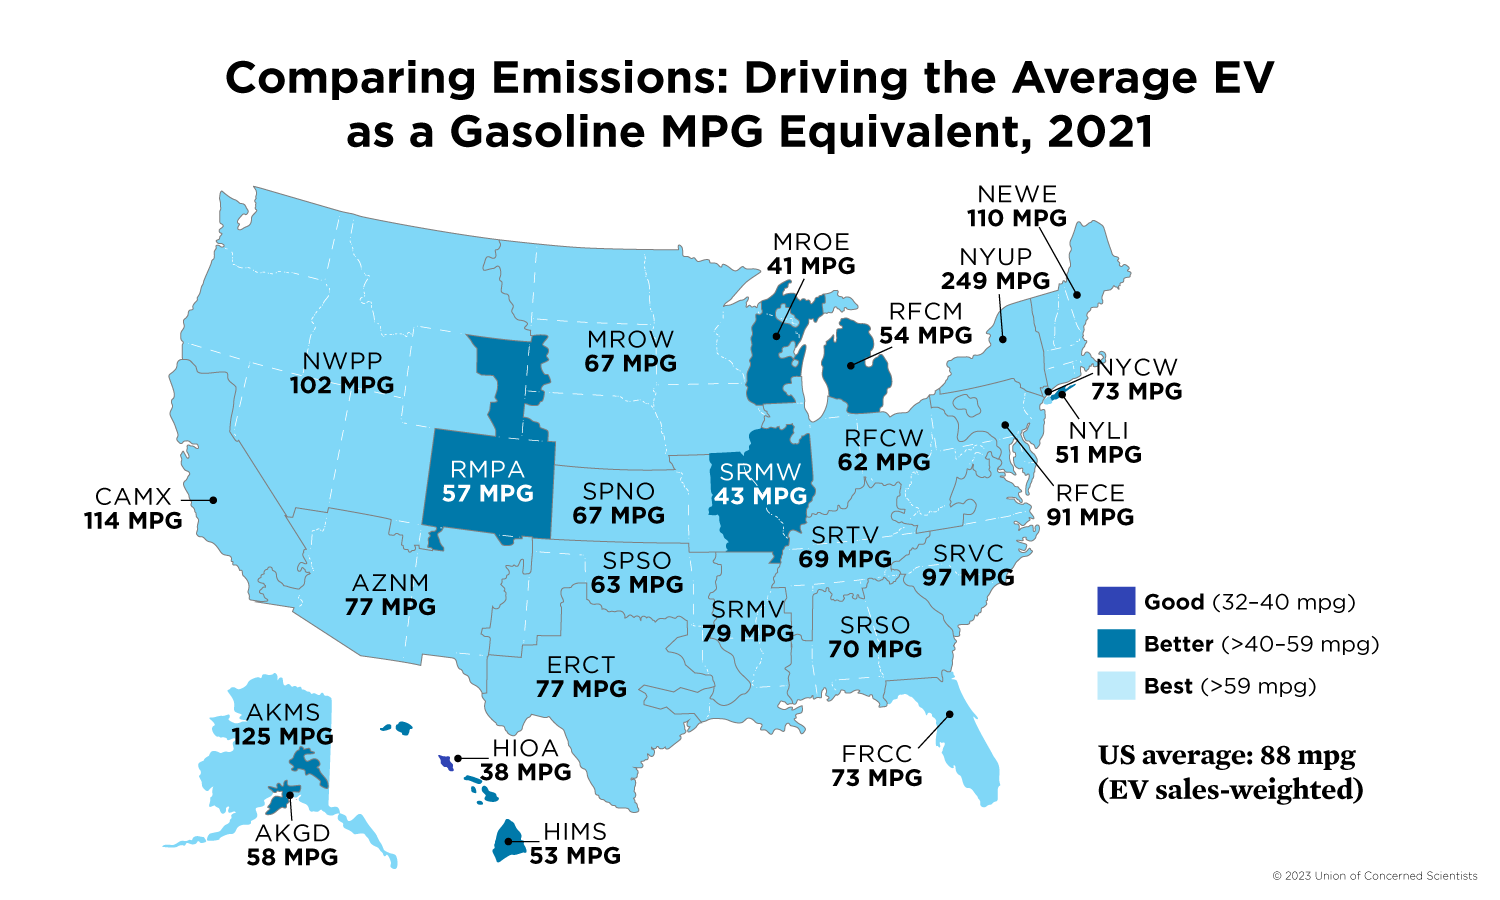 A map of the U.S. comparing emissions from driving an average EV as a gasoline MPG equivalent